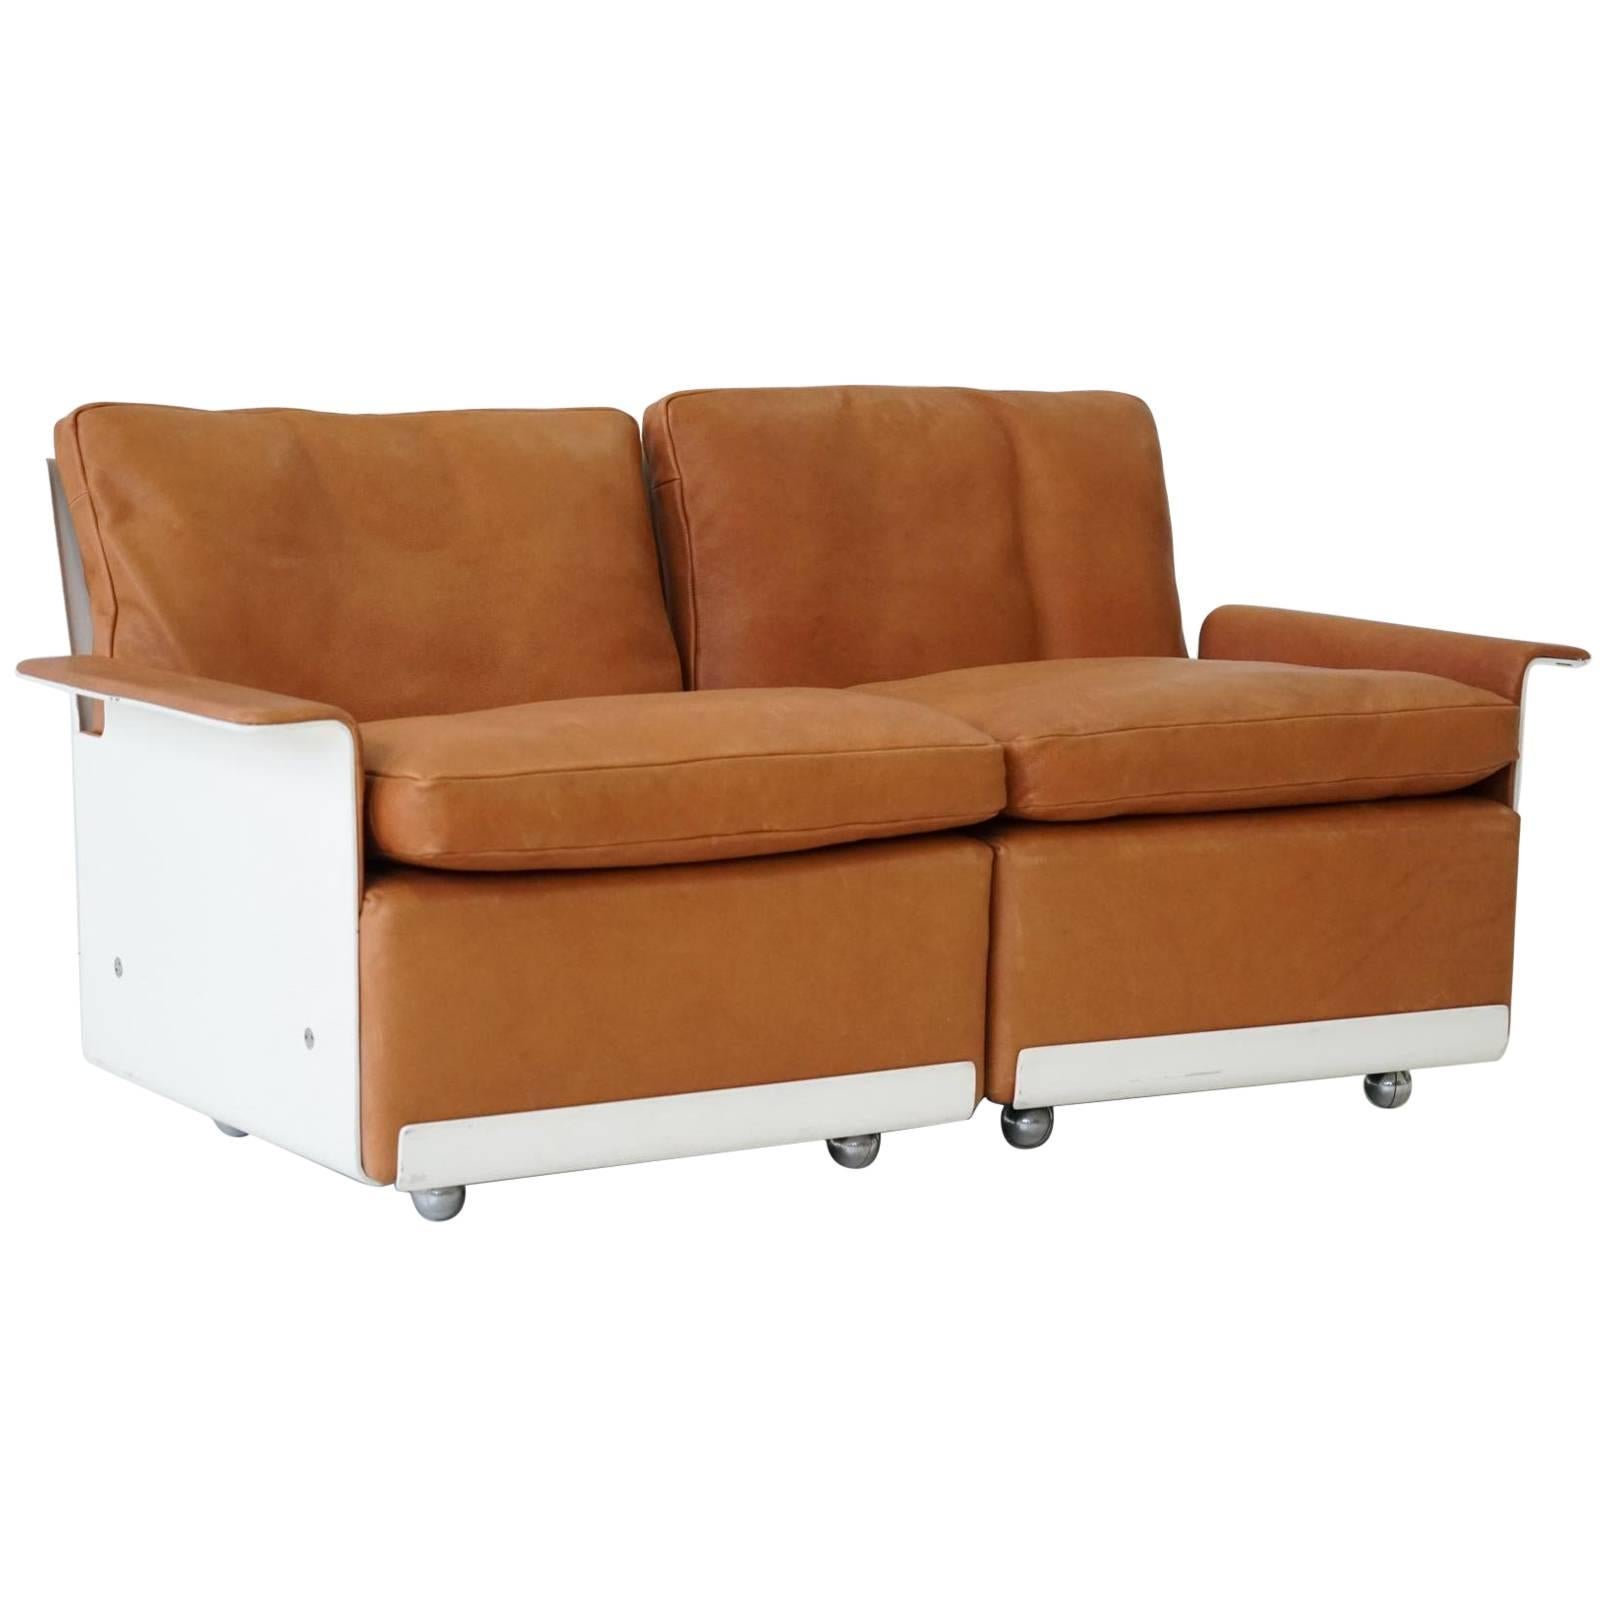 RZ 62 620 Modular Two-Seat Sofa in Leather by Dieter Rams for Vitsoe, 1960s